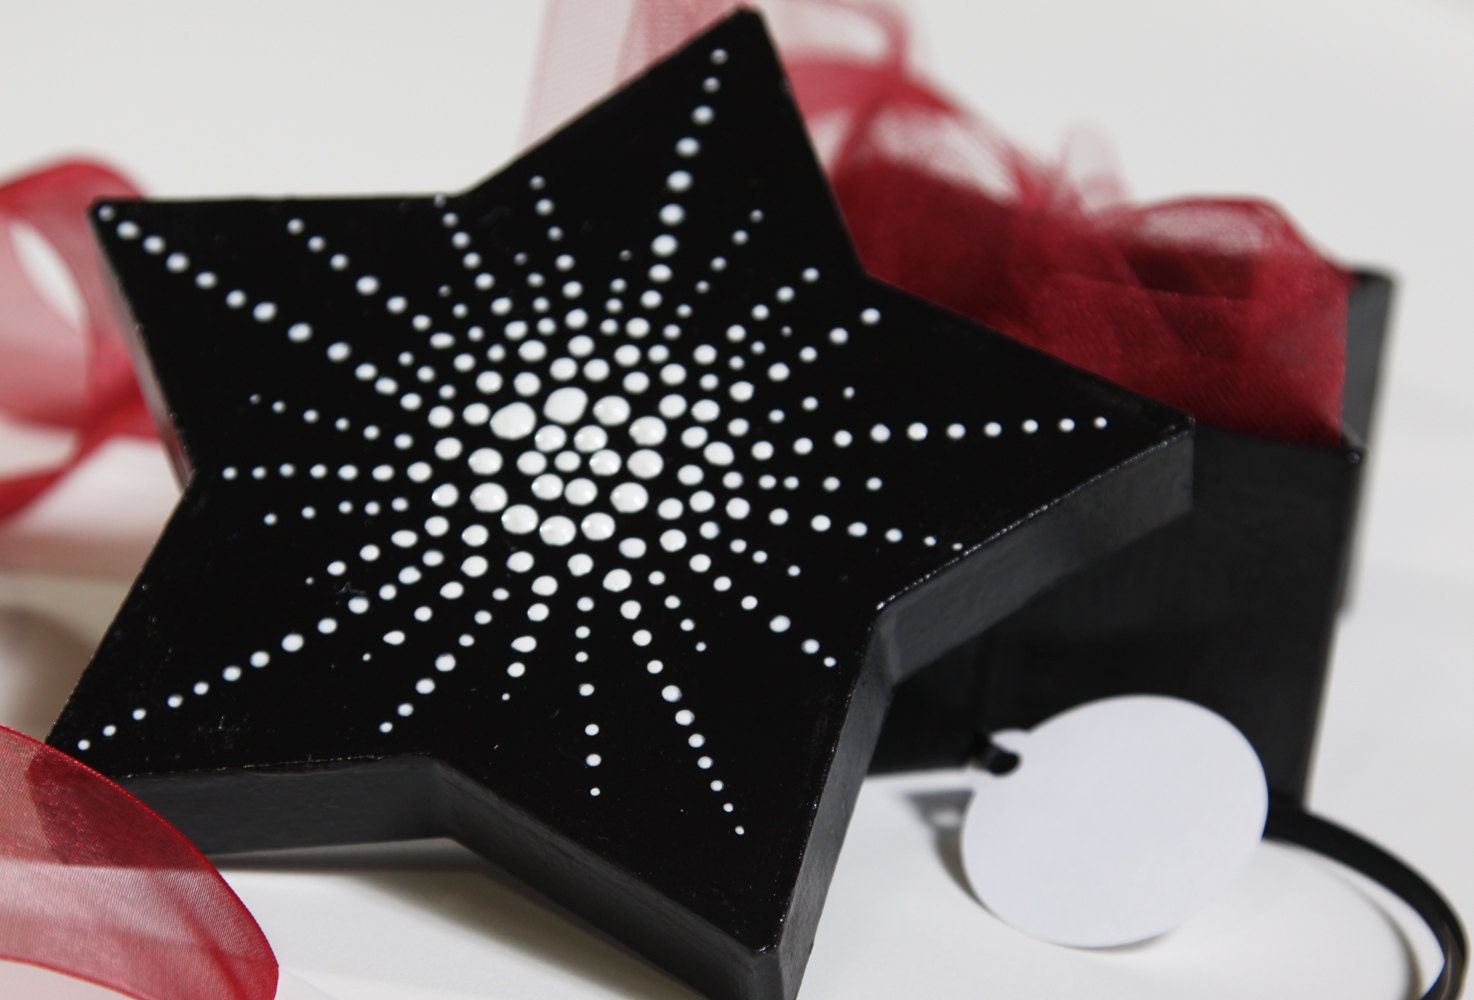 Star Gift Box Set - Hand Painted Black and White with Wine Red Ribbon